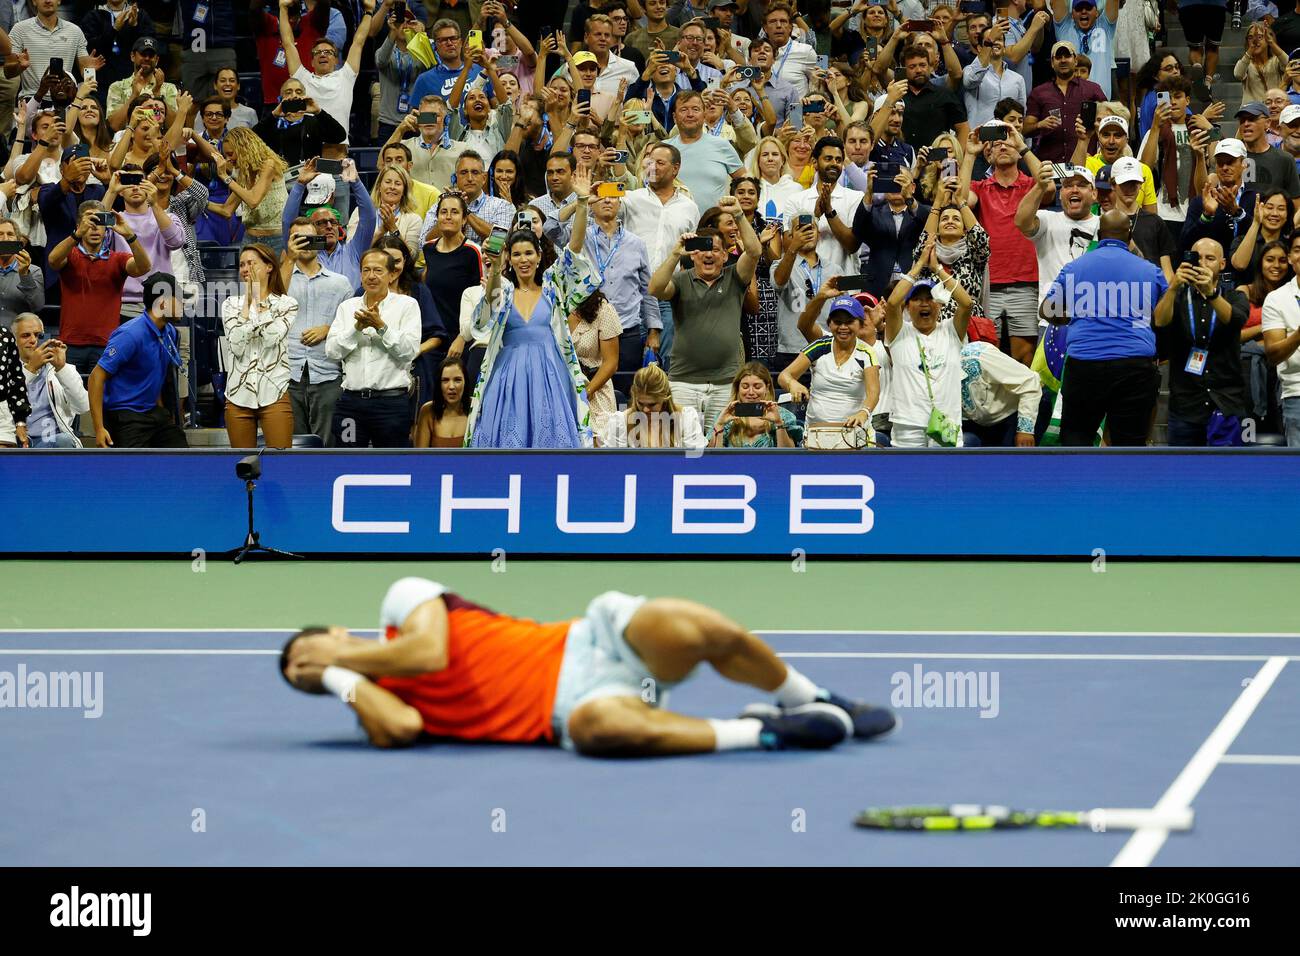 New York, USA, 11th.September 2022. Crowd celebrating the win of Spanish tennis player Carlos Alcaraz at the Mens Final of the US  Open Championships, Billie Jean King National Tennis Center on Sunday 11September 2022. © Juergen Hasenkopf / Alamy Live News Stock Photo